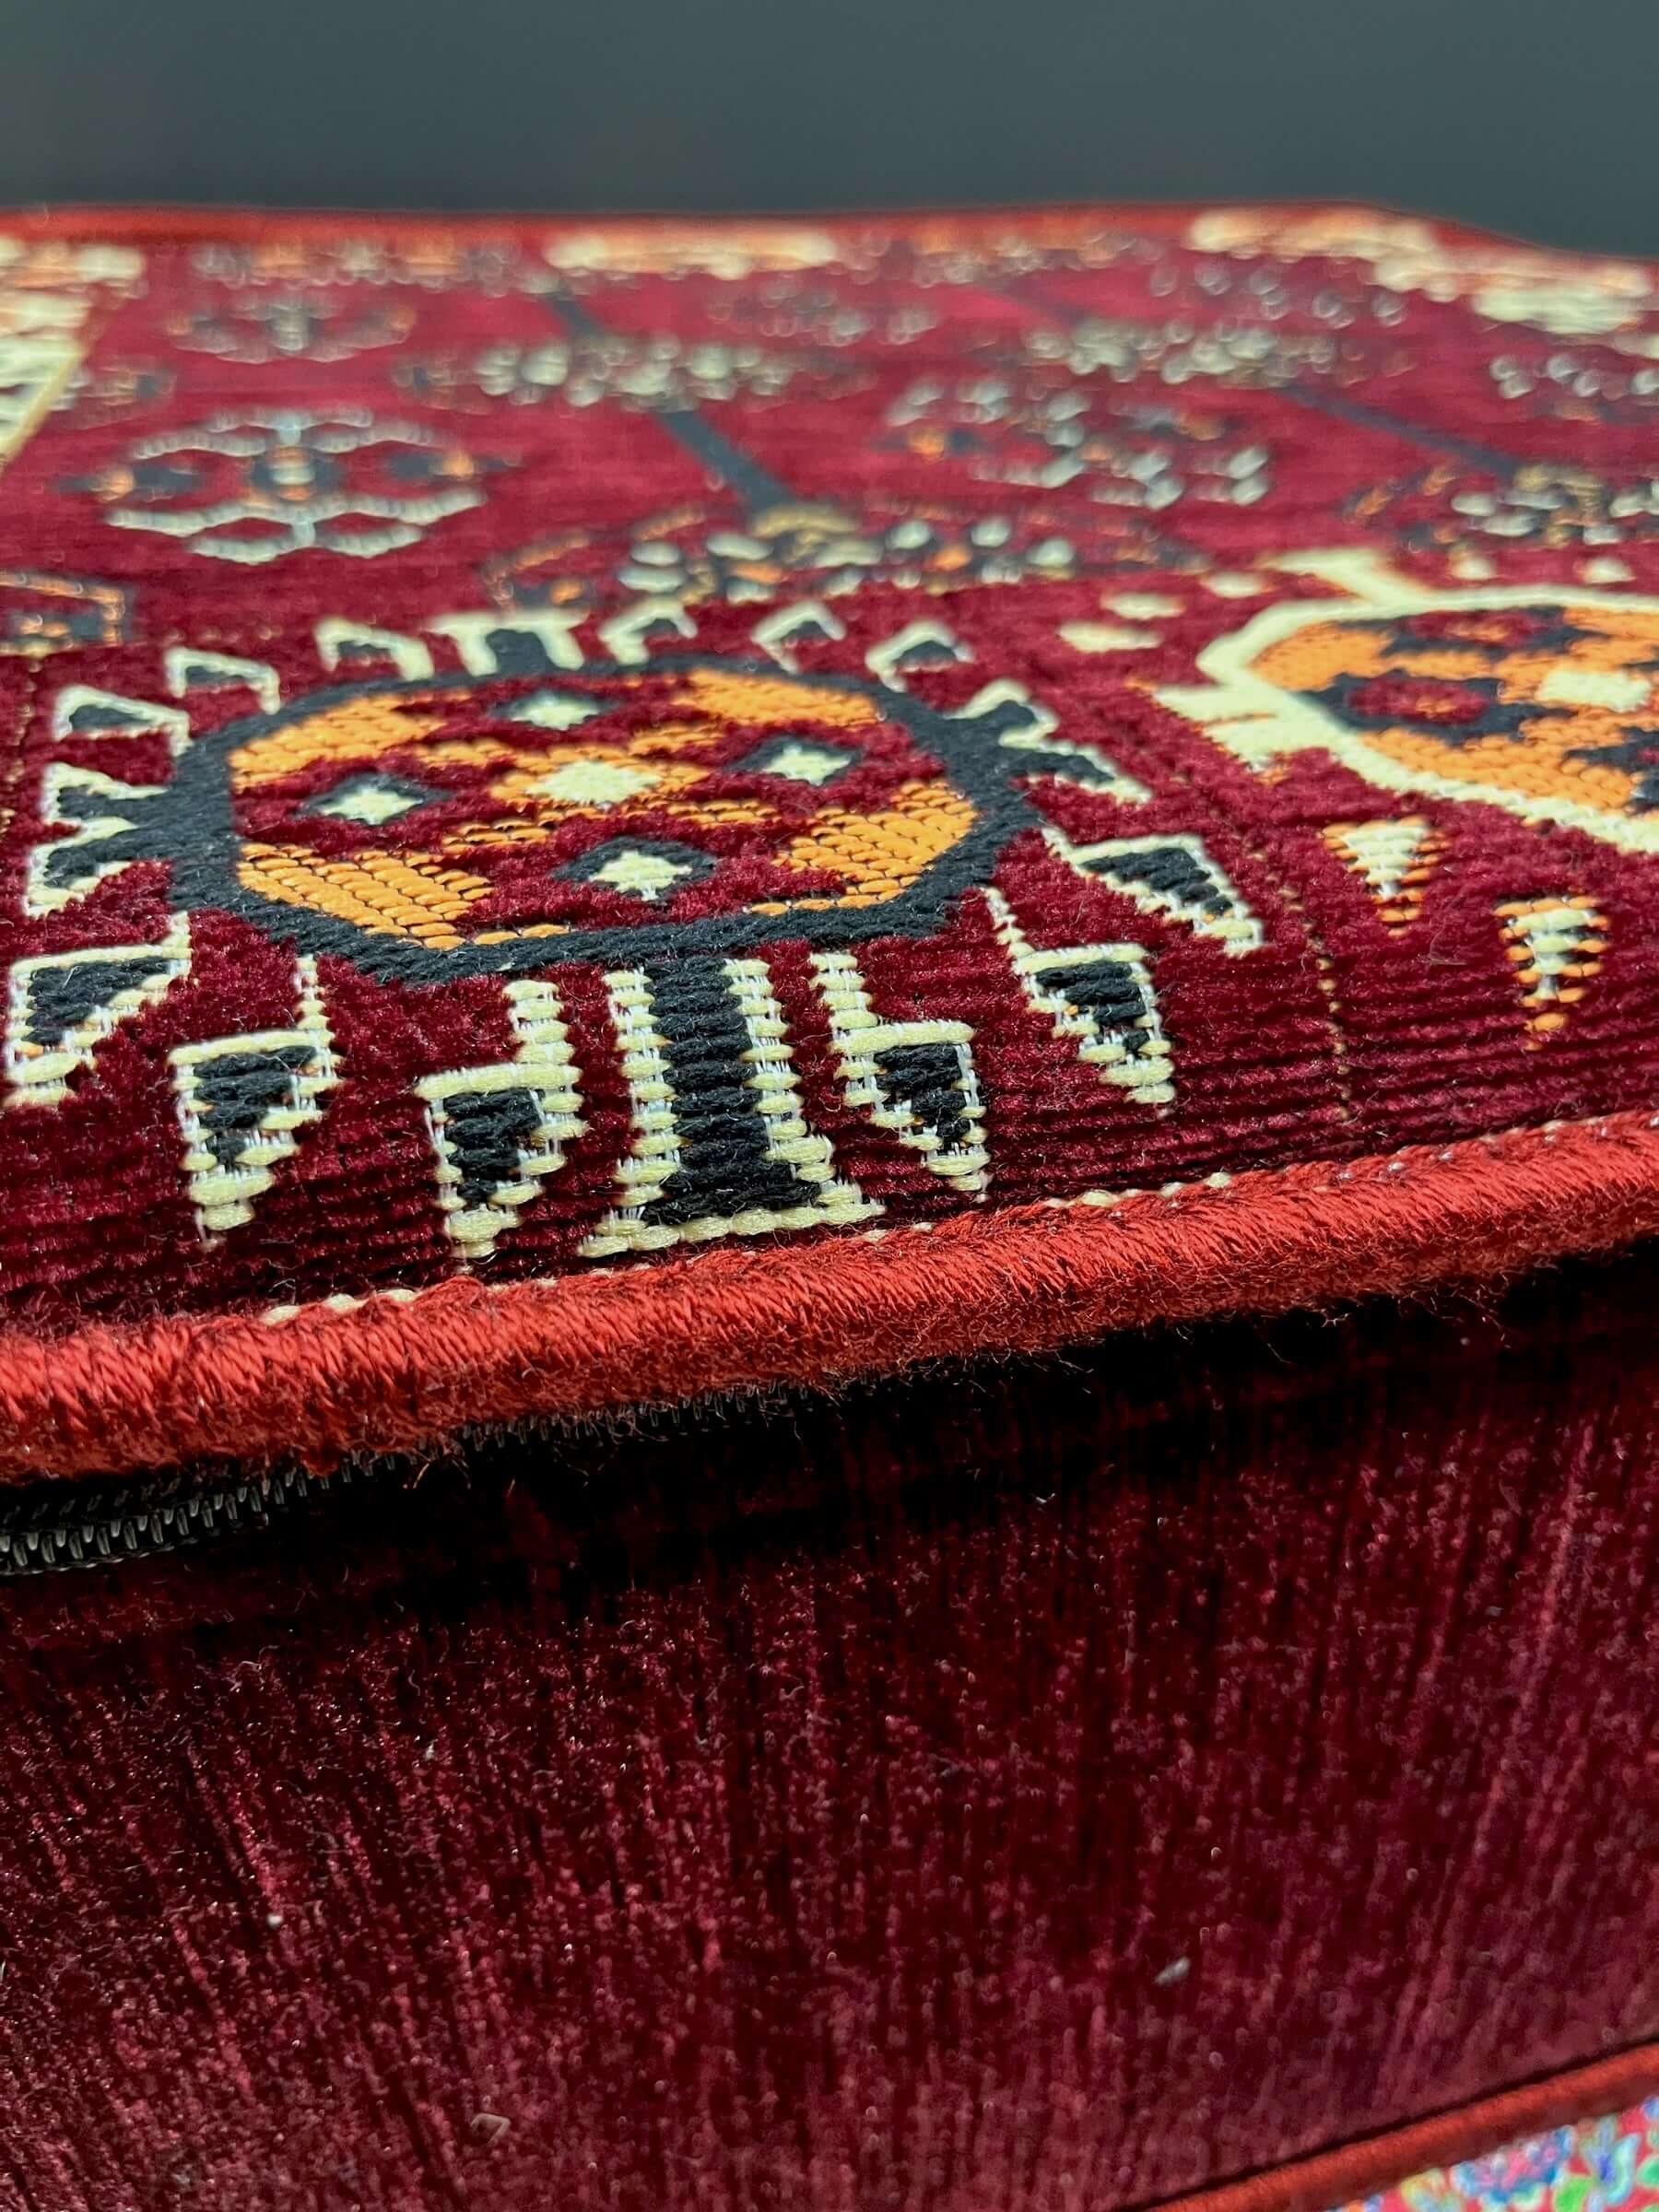 60x60 Cushion Table (Maroon & Orange)This 60x60 cushion table will bring an elegant, luxurious look to your home. Crafted from Turkish fabrics with a solid sponge interior, this table is stylish and built to last. It's beautiful designs and traditional lo